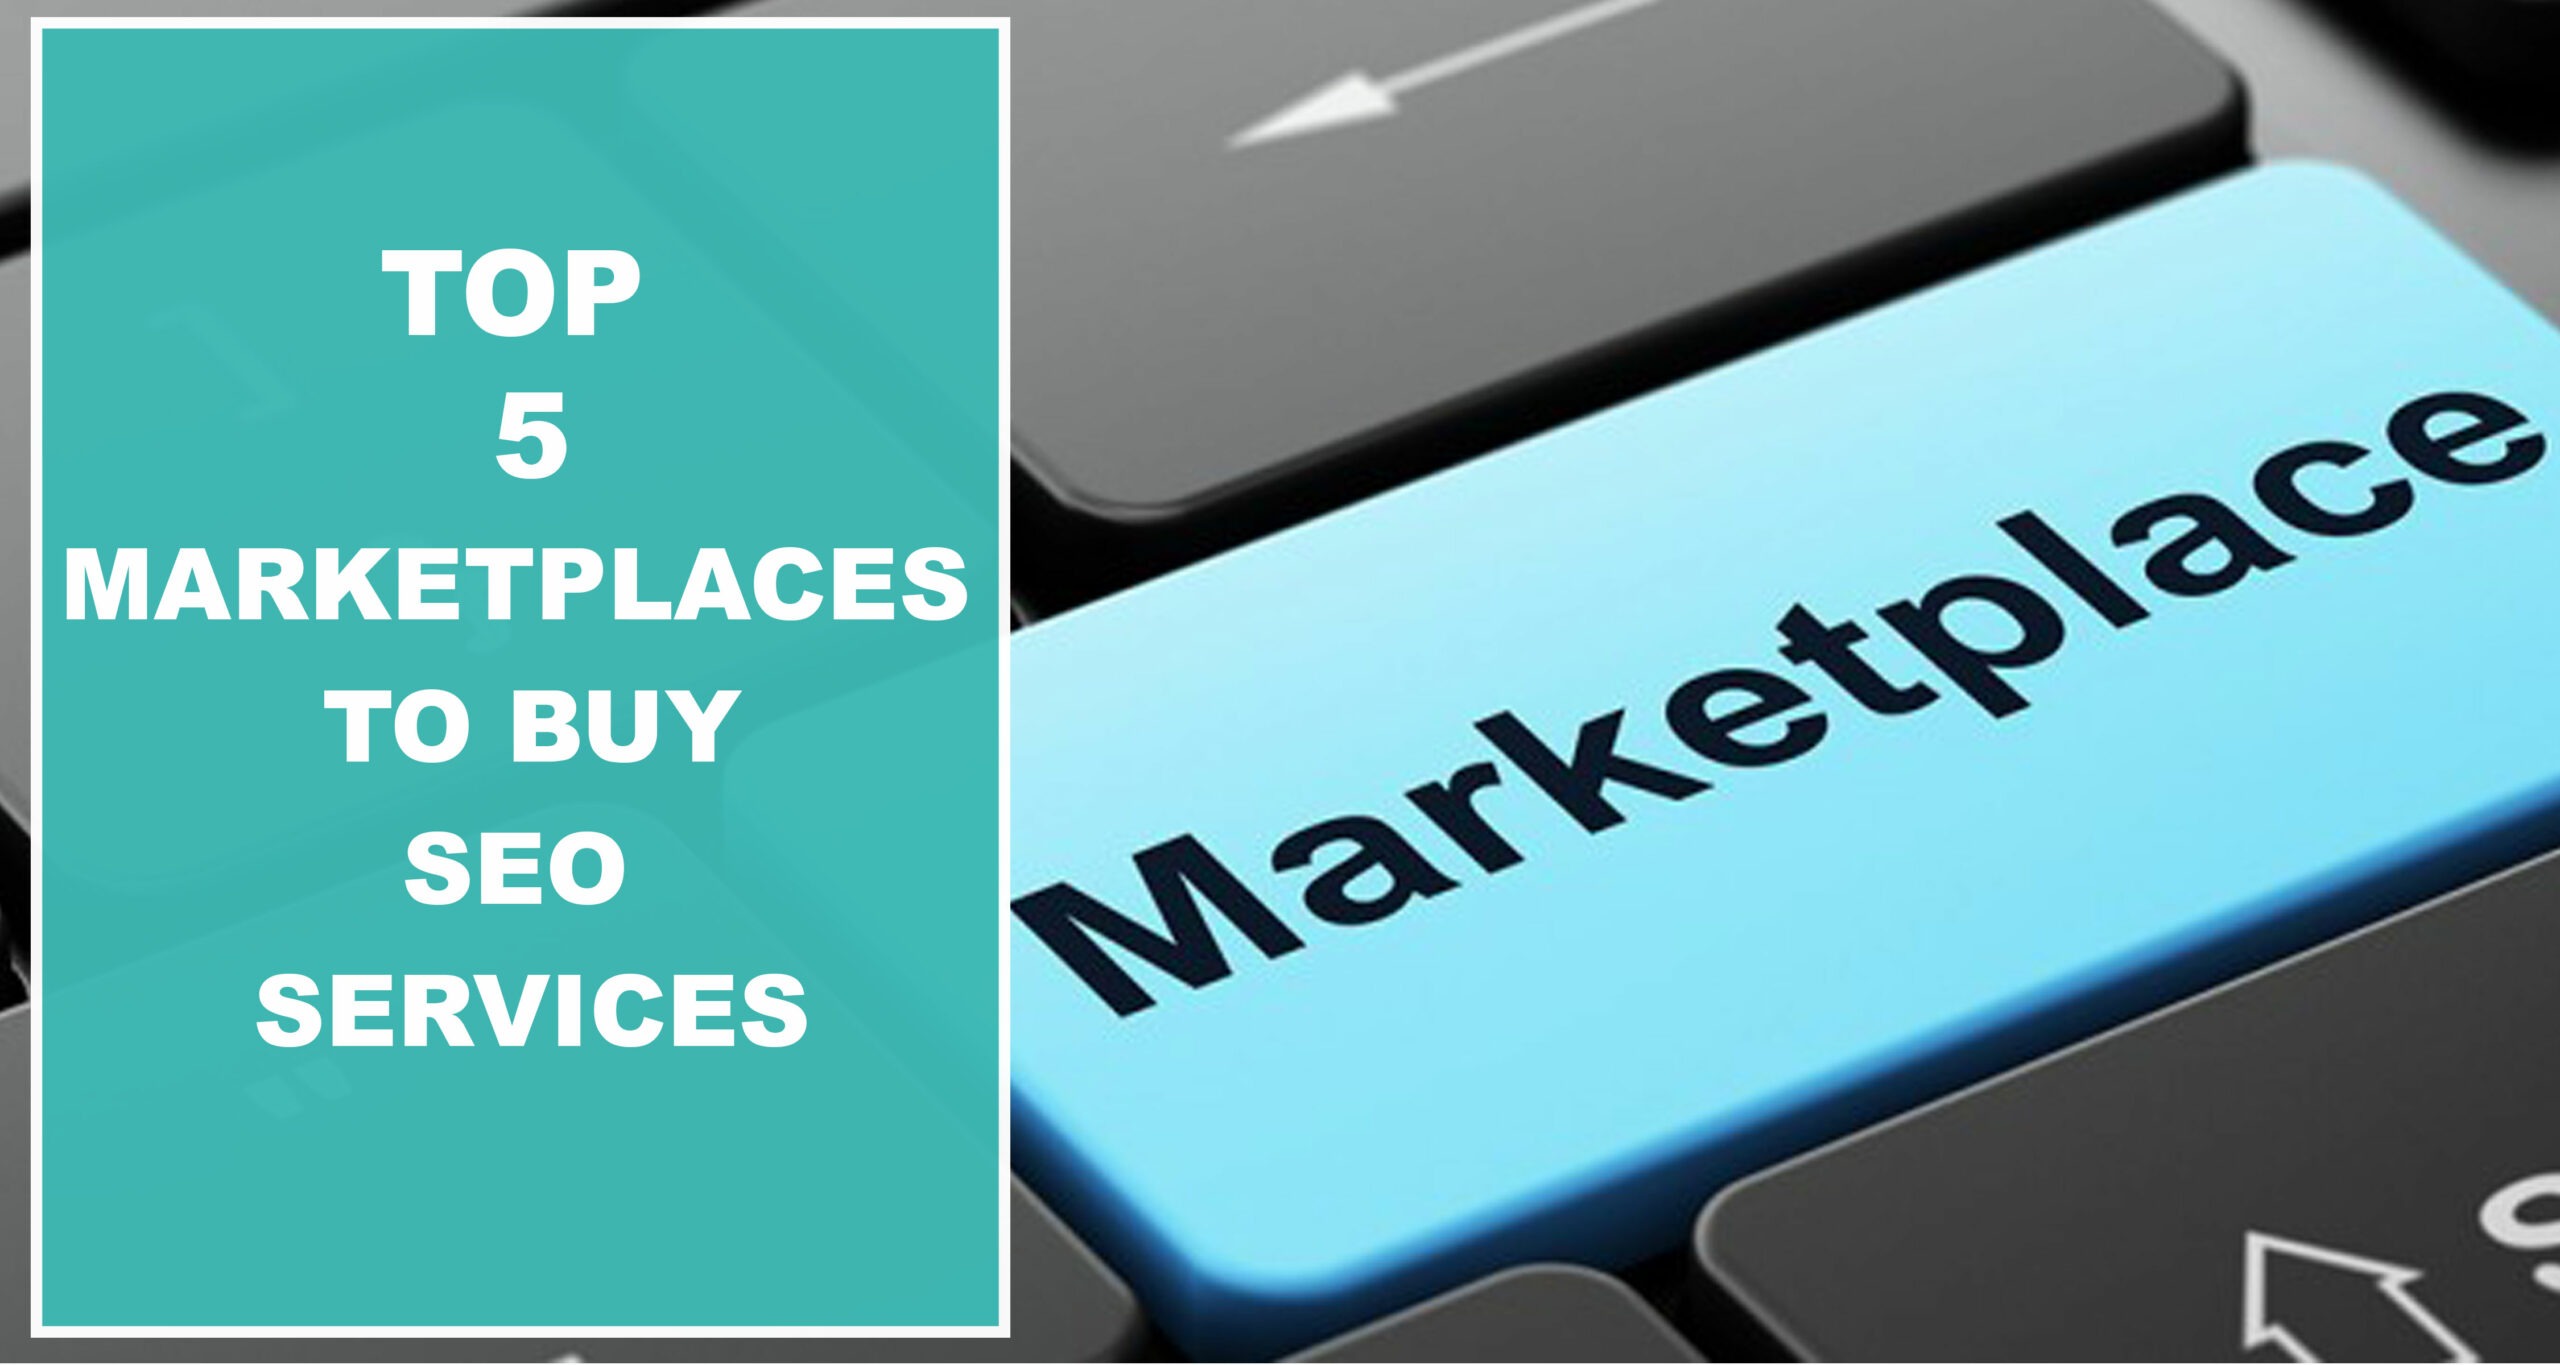 Top-5-marketplaces-to-buy-seo-service